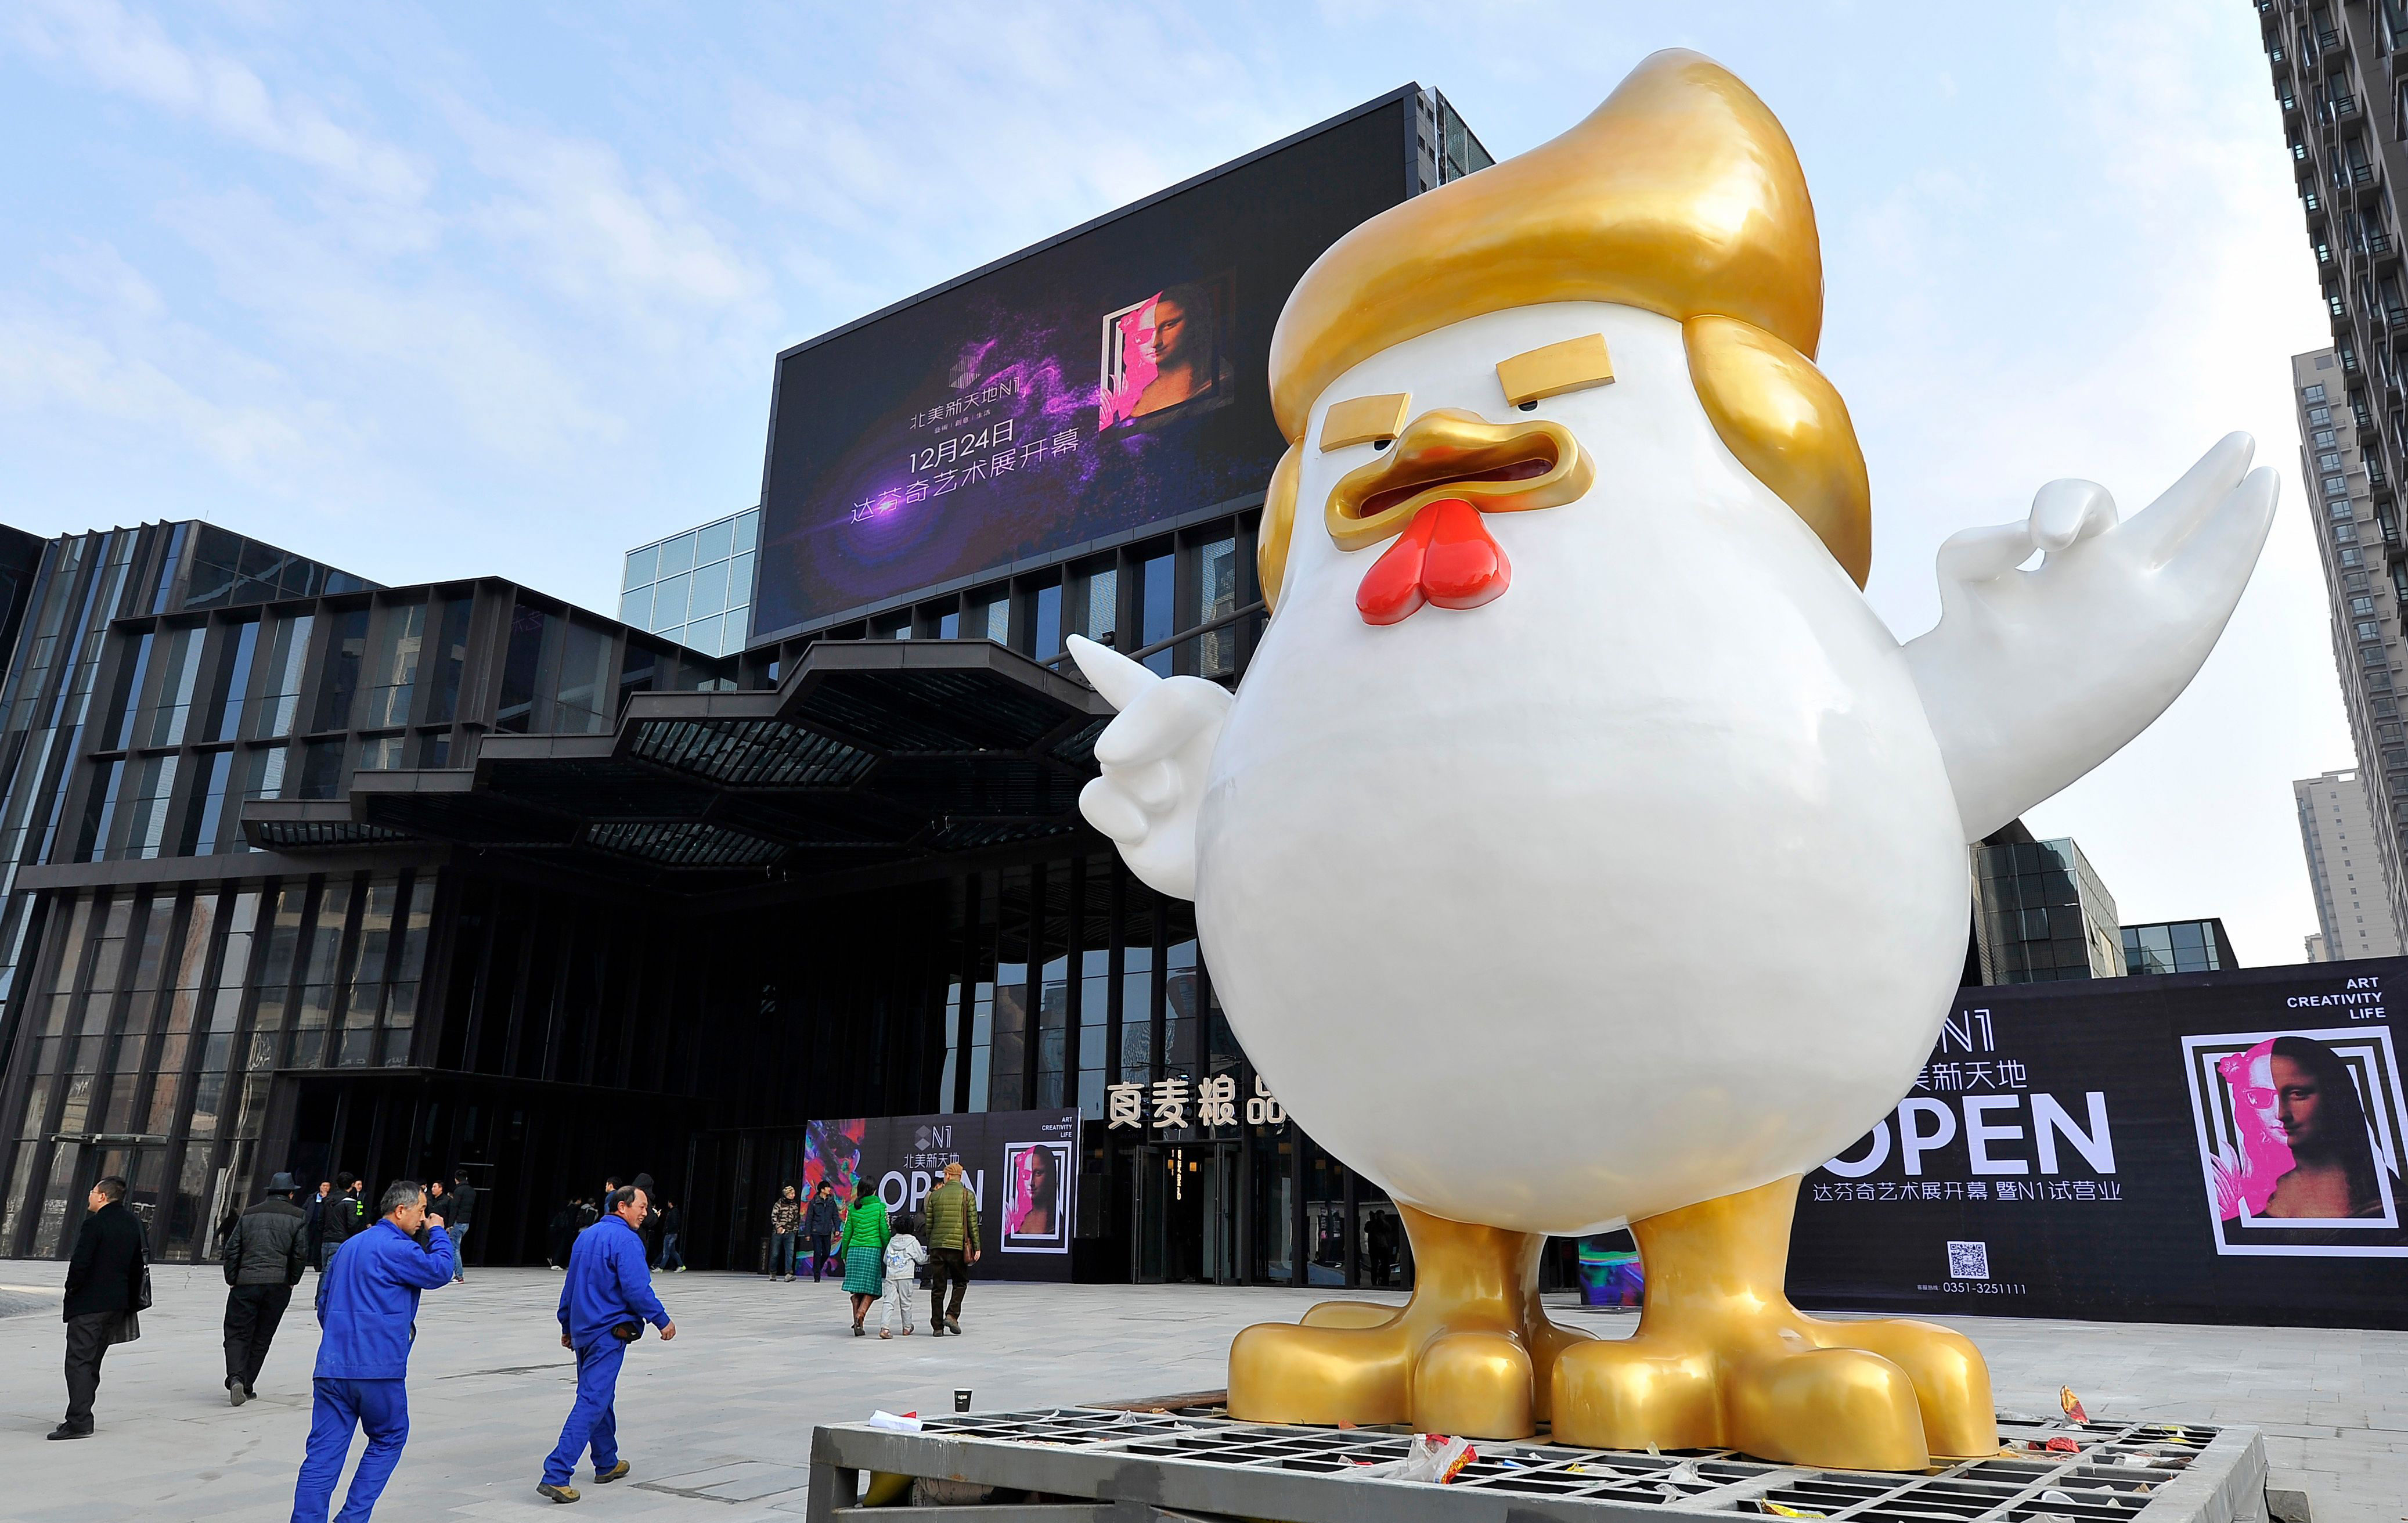 giant chicken sculpture outside a shopping mall in Taiyuan